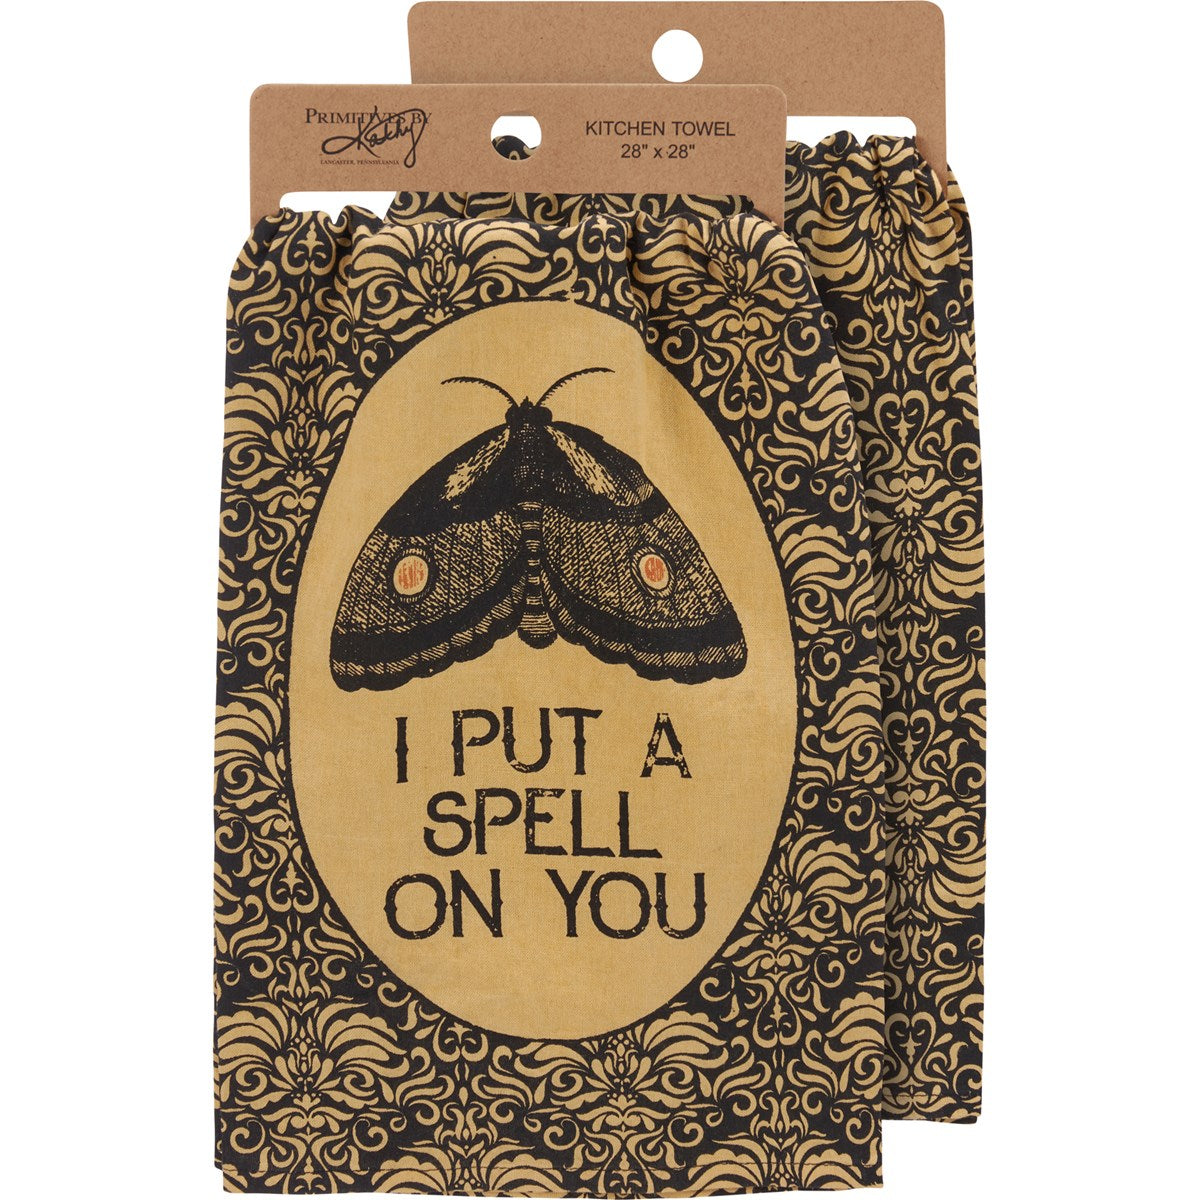 Spell on You - Kitchen Towel